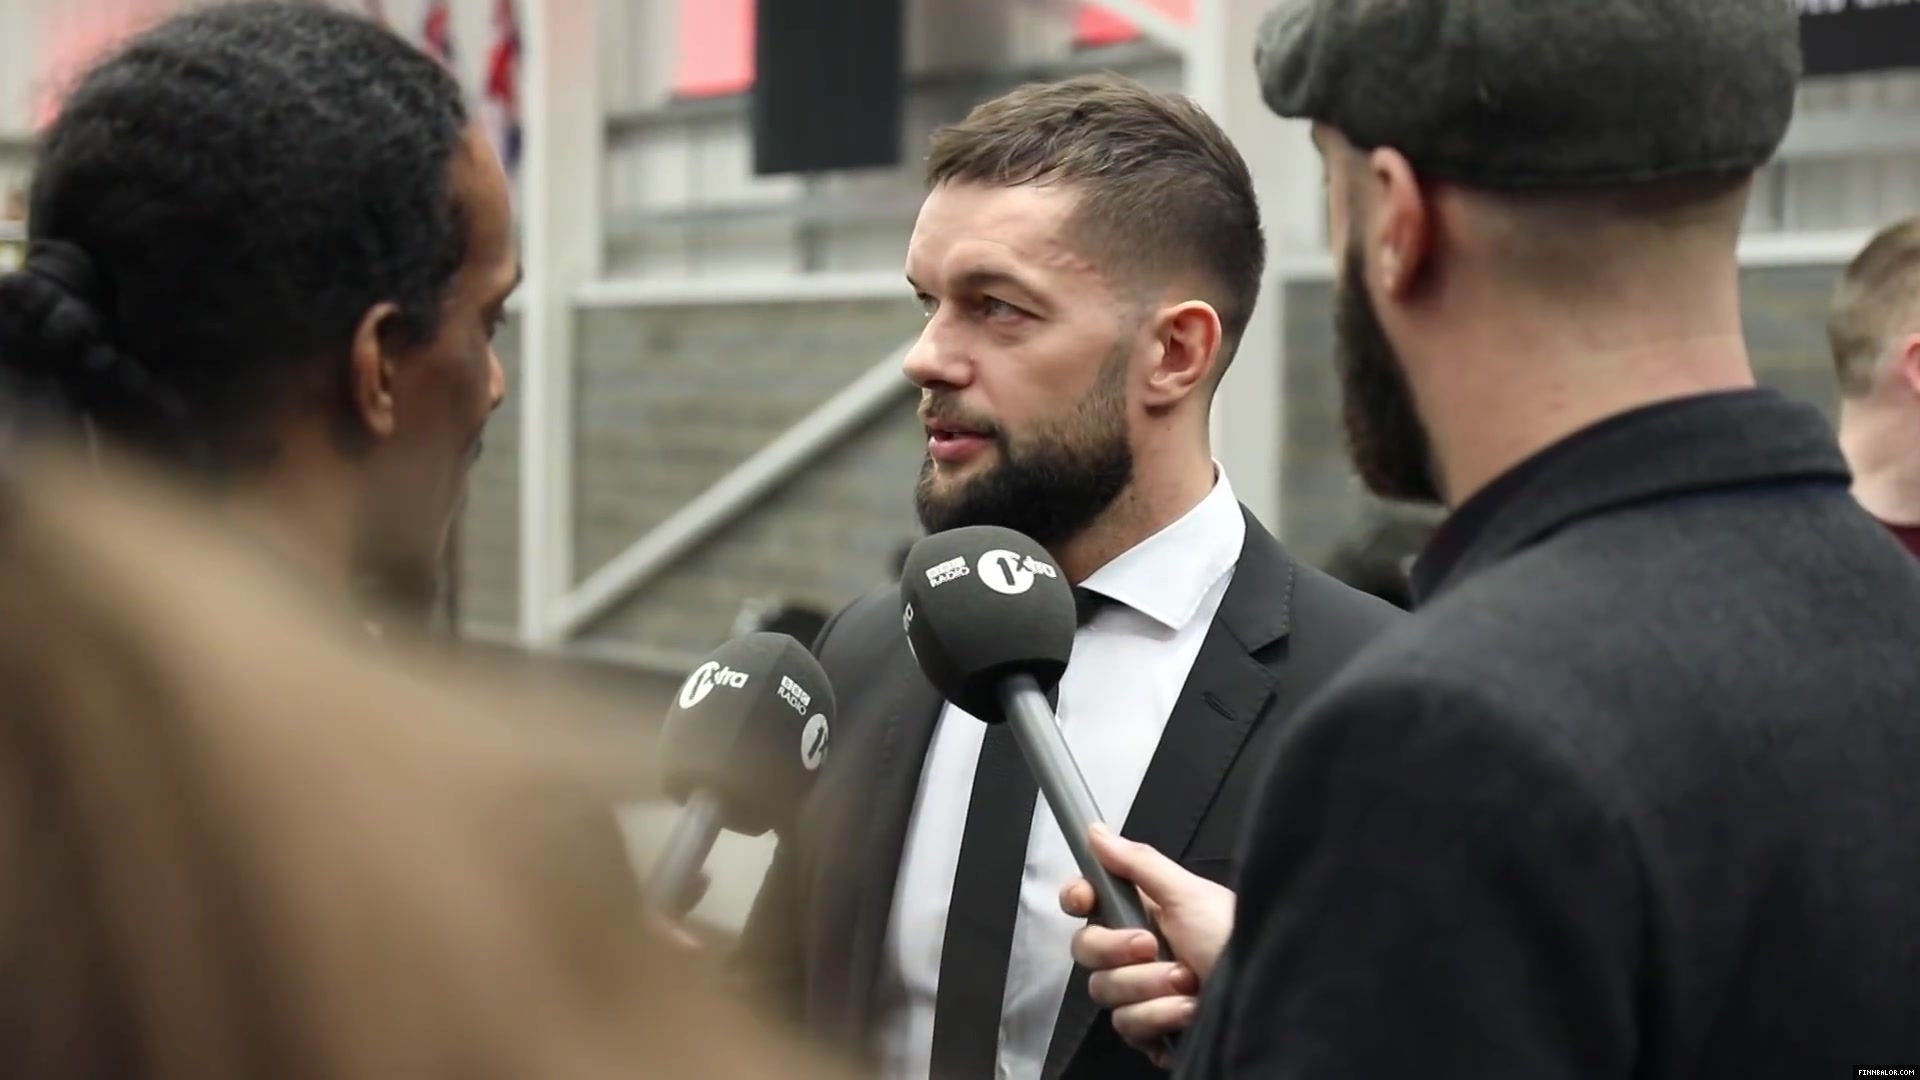 WWE_Superstar_FINN_BALOR_joins_MOUSTACHE_MOUNTAIN_at_the_opening_of_the_NXT_UK_PC_023.jpg